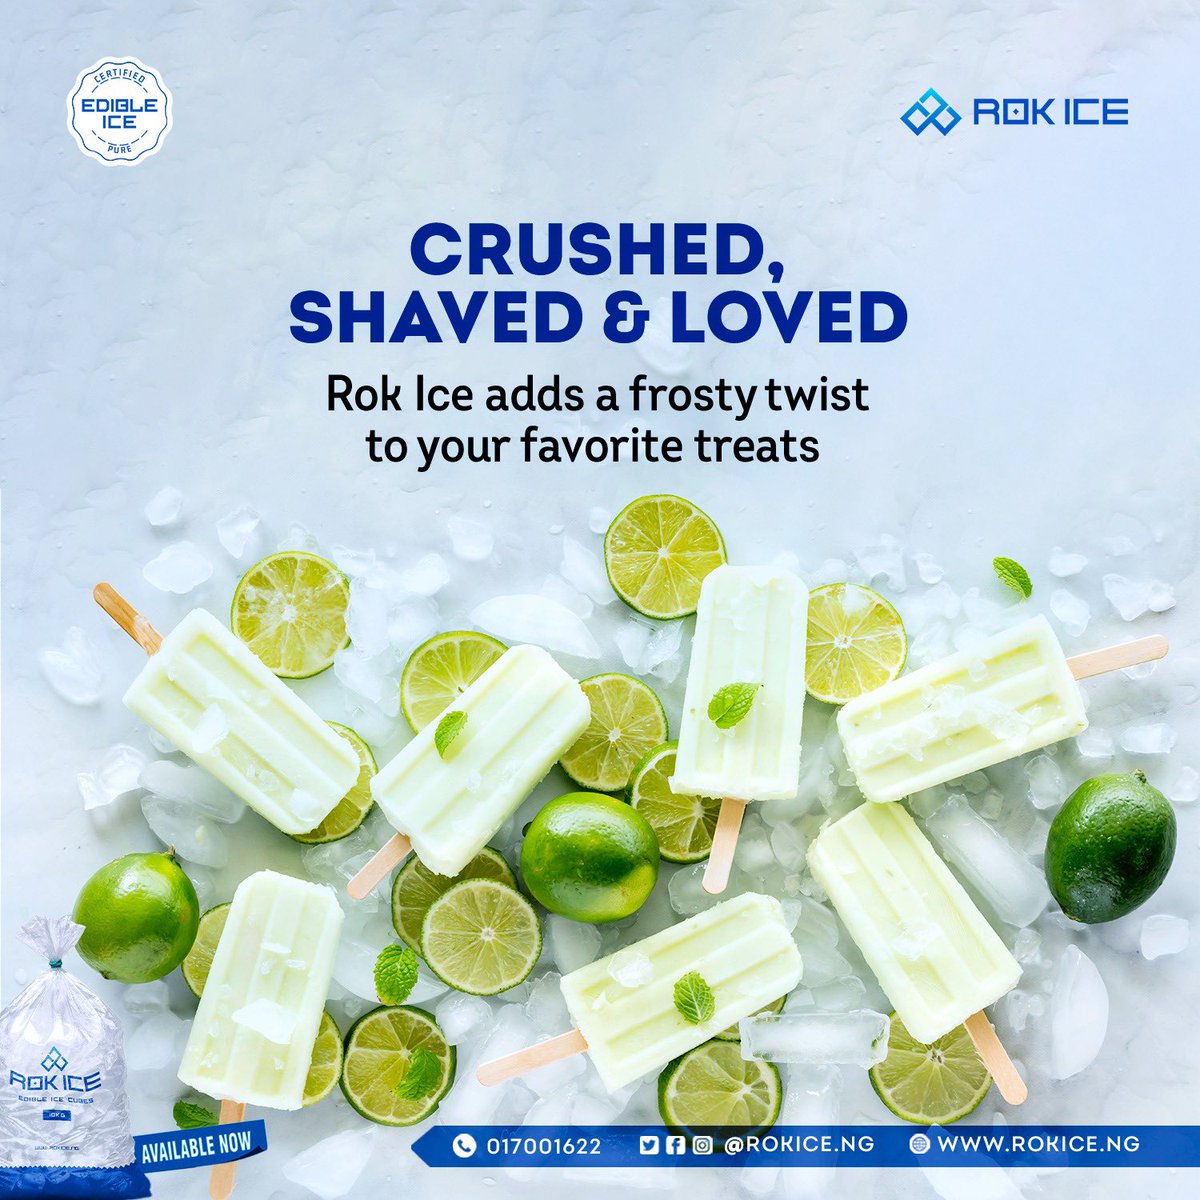 Add a twist to your treats with Rok Ice! Our signature crushed and shaved ice will keep you cool and craving for more.  Dive into a world of icy goodness!
Send a DM to order 

##rokice #thelifeoftheparty #icytreats #iceblocks #crunchyice #madeinlagos #icecompanyinlagos